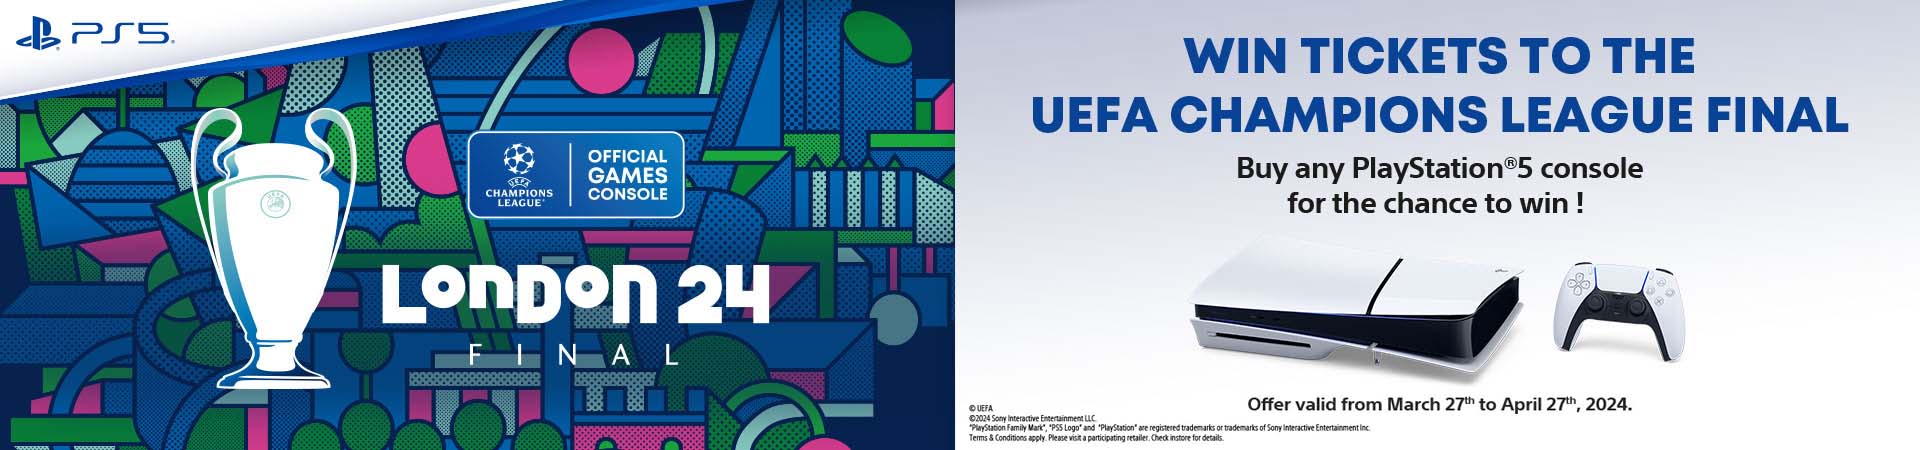 Buy Playstation Console & Win UEFA CL final ticket